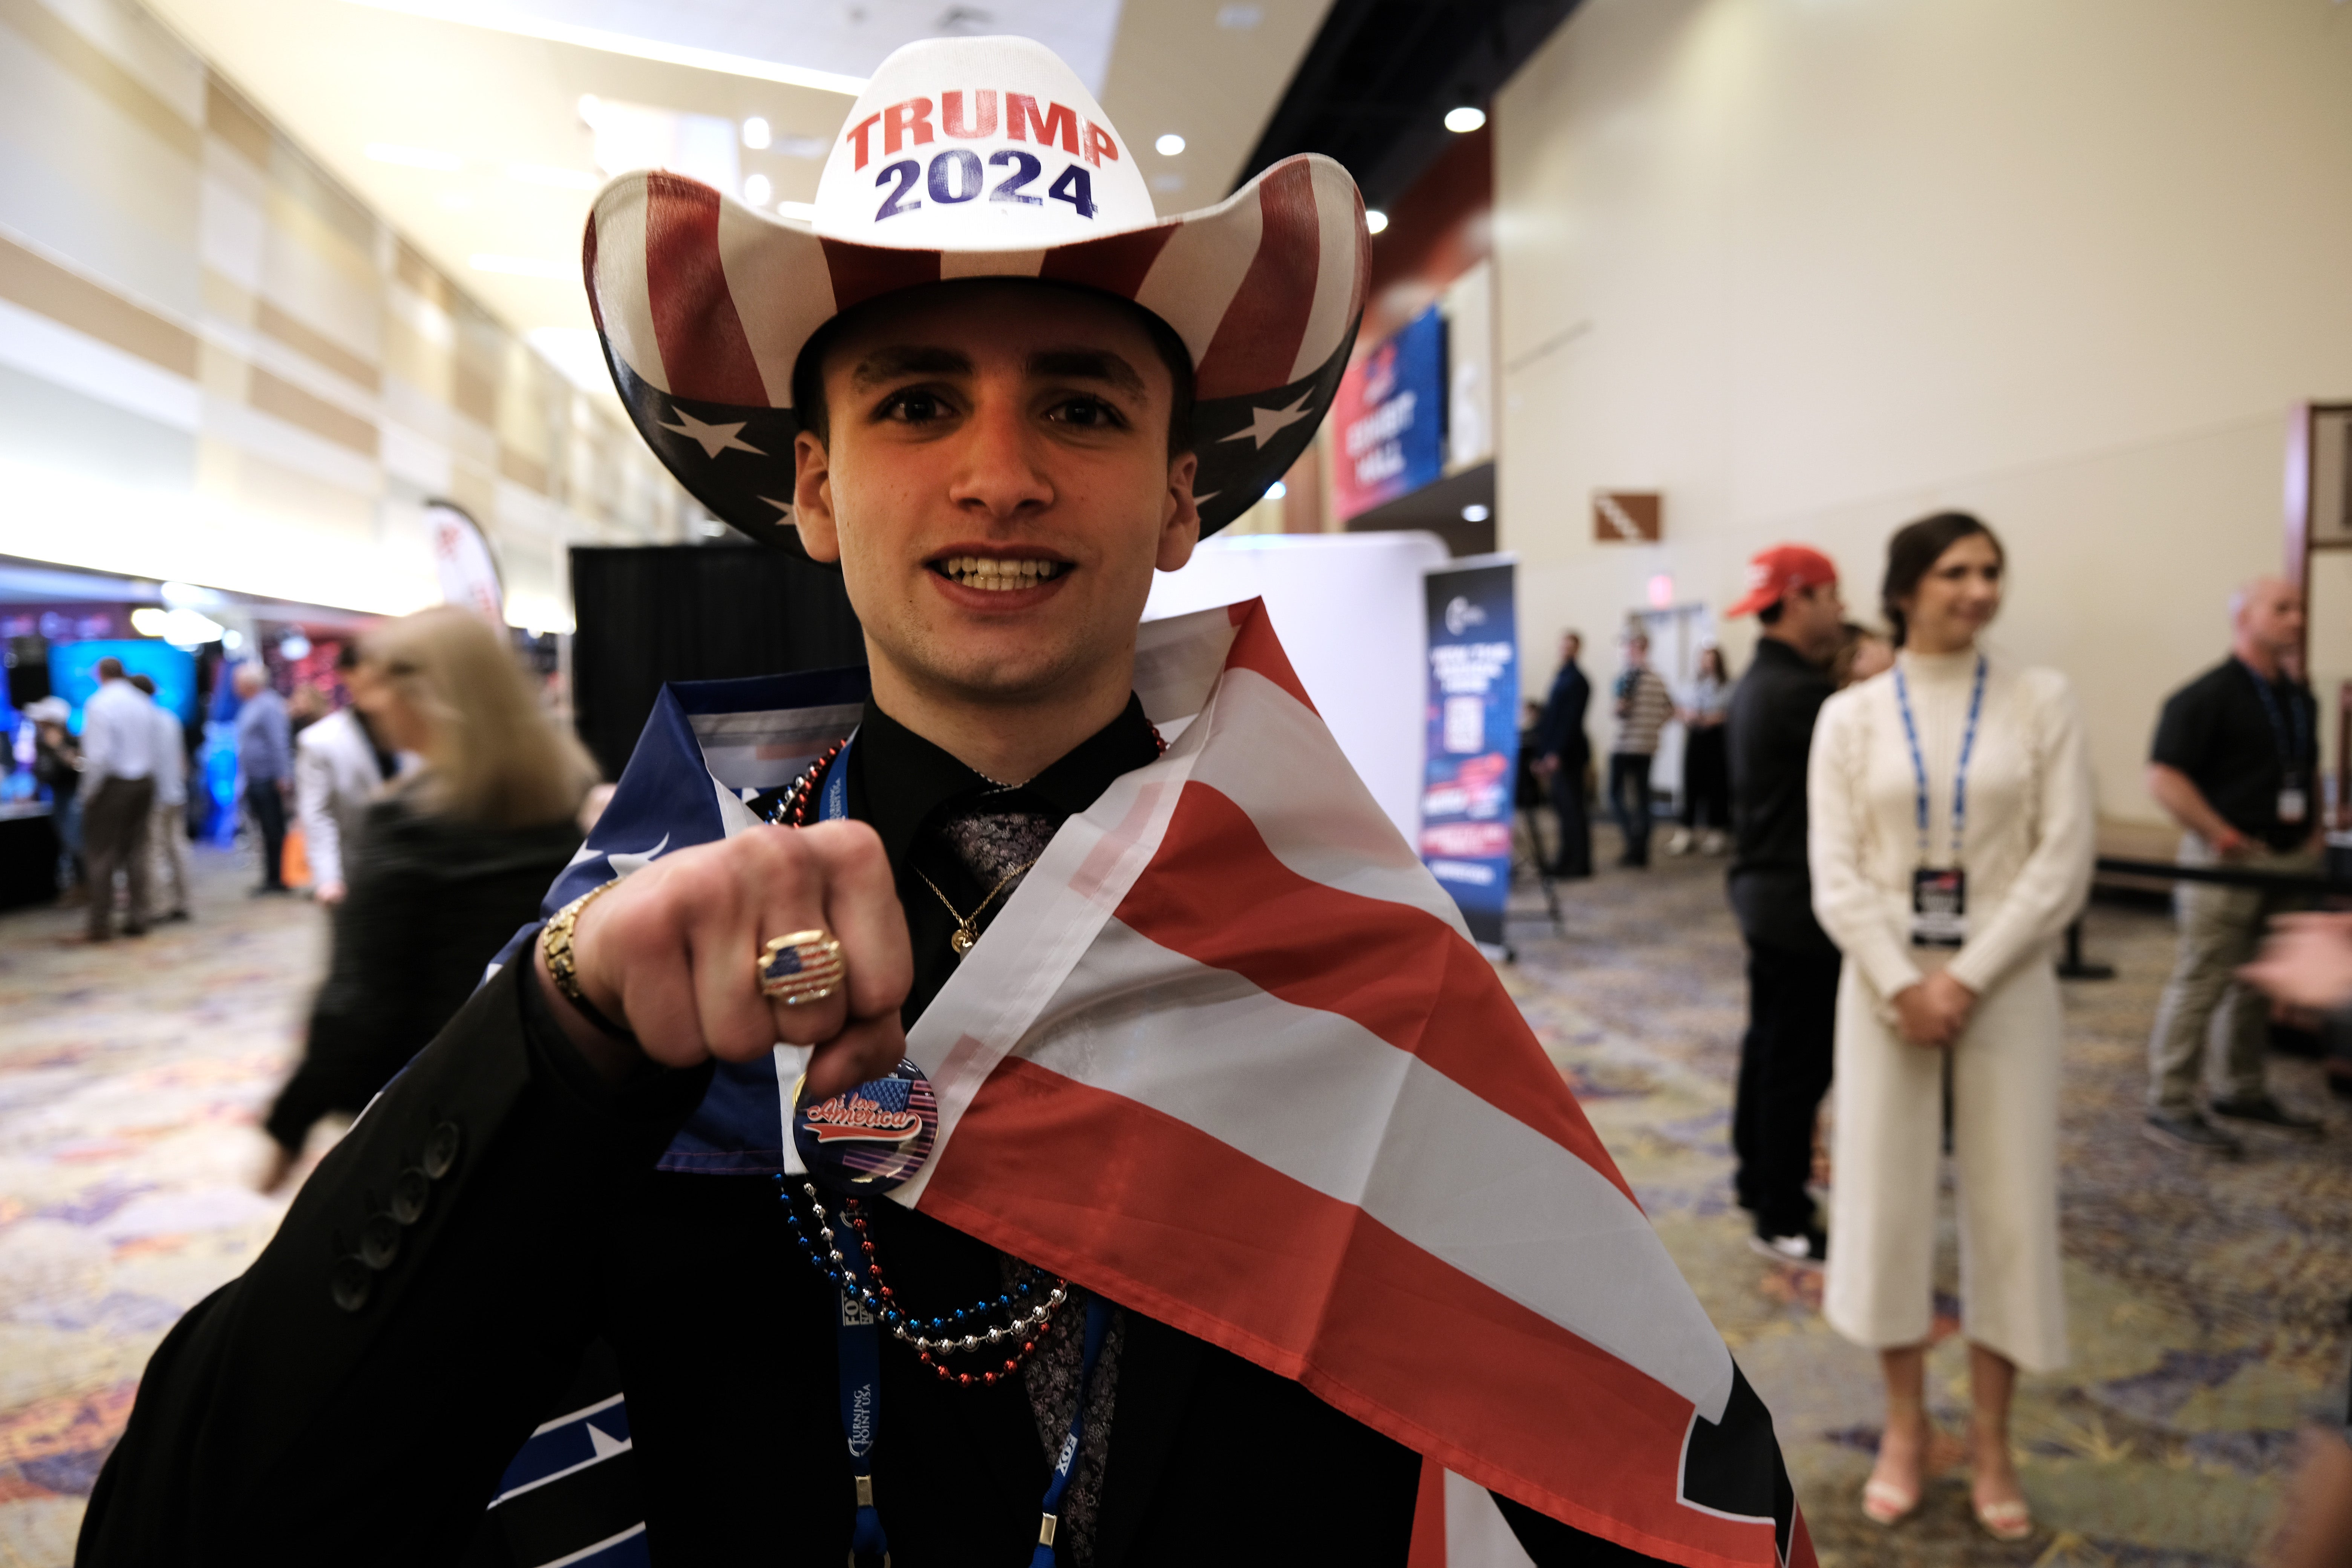 Turning Point USA, promotes ‘freedom, free markets and limited government’